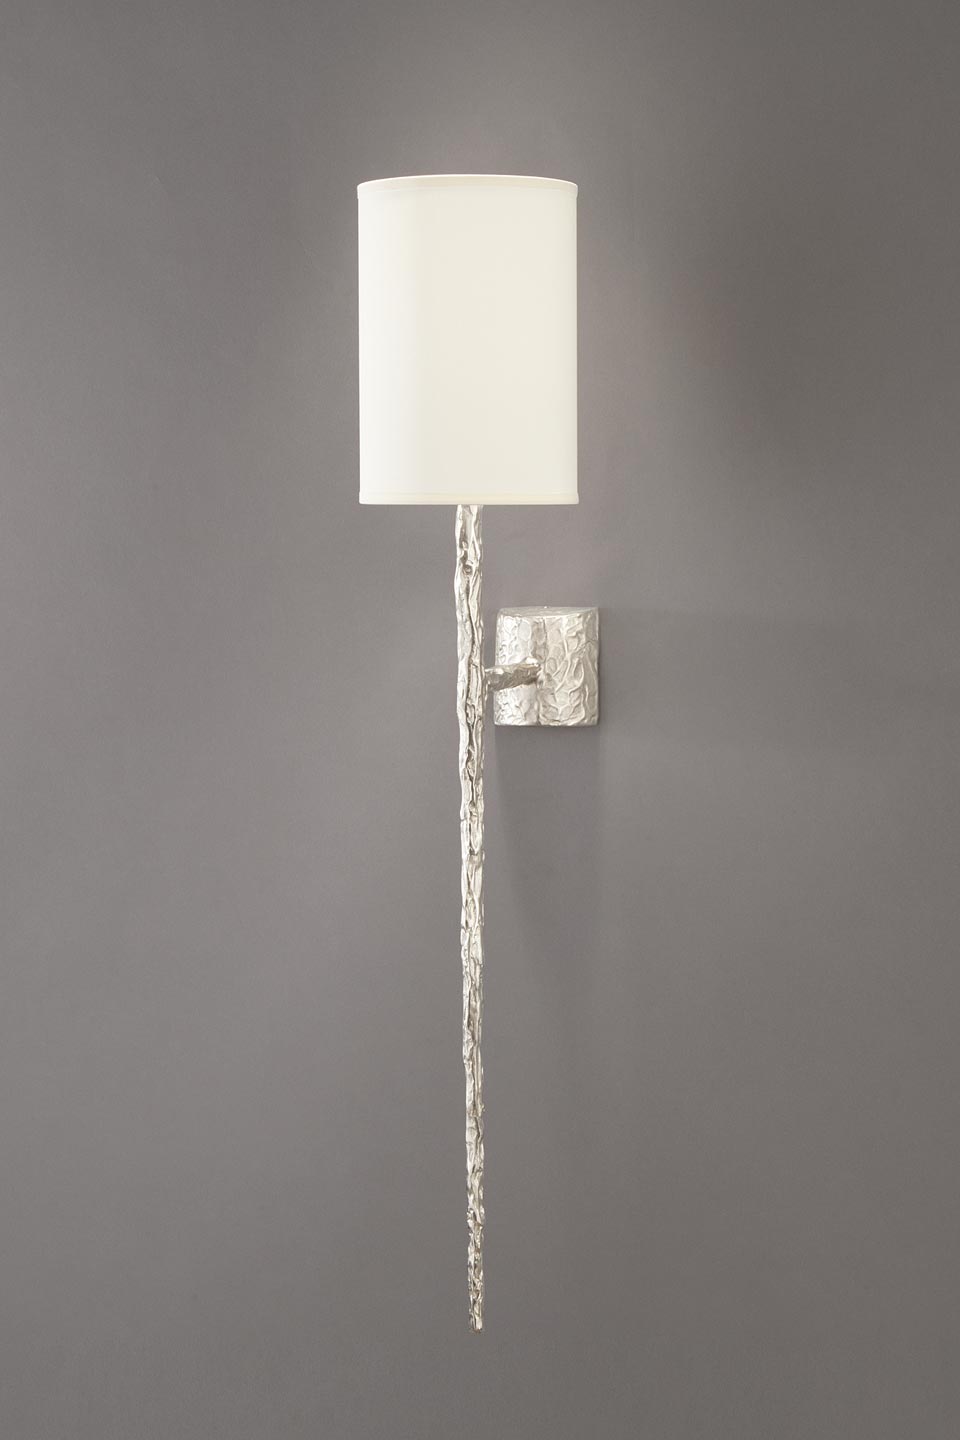 Héra long spear wall lamp in silvered bronze. Objet insolite. 